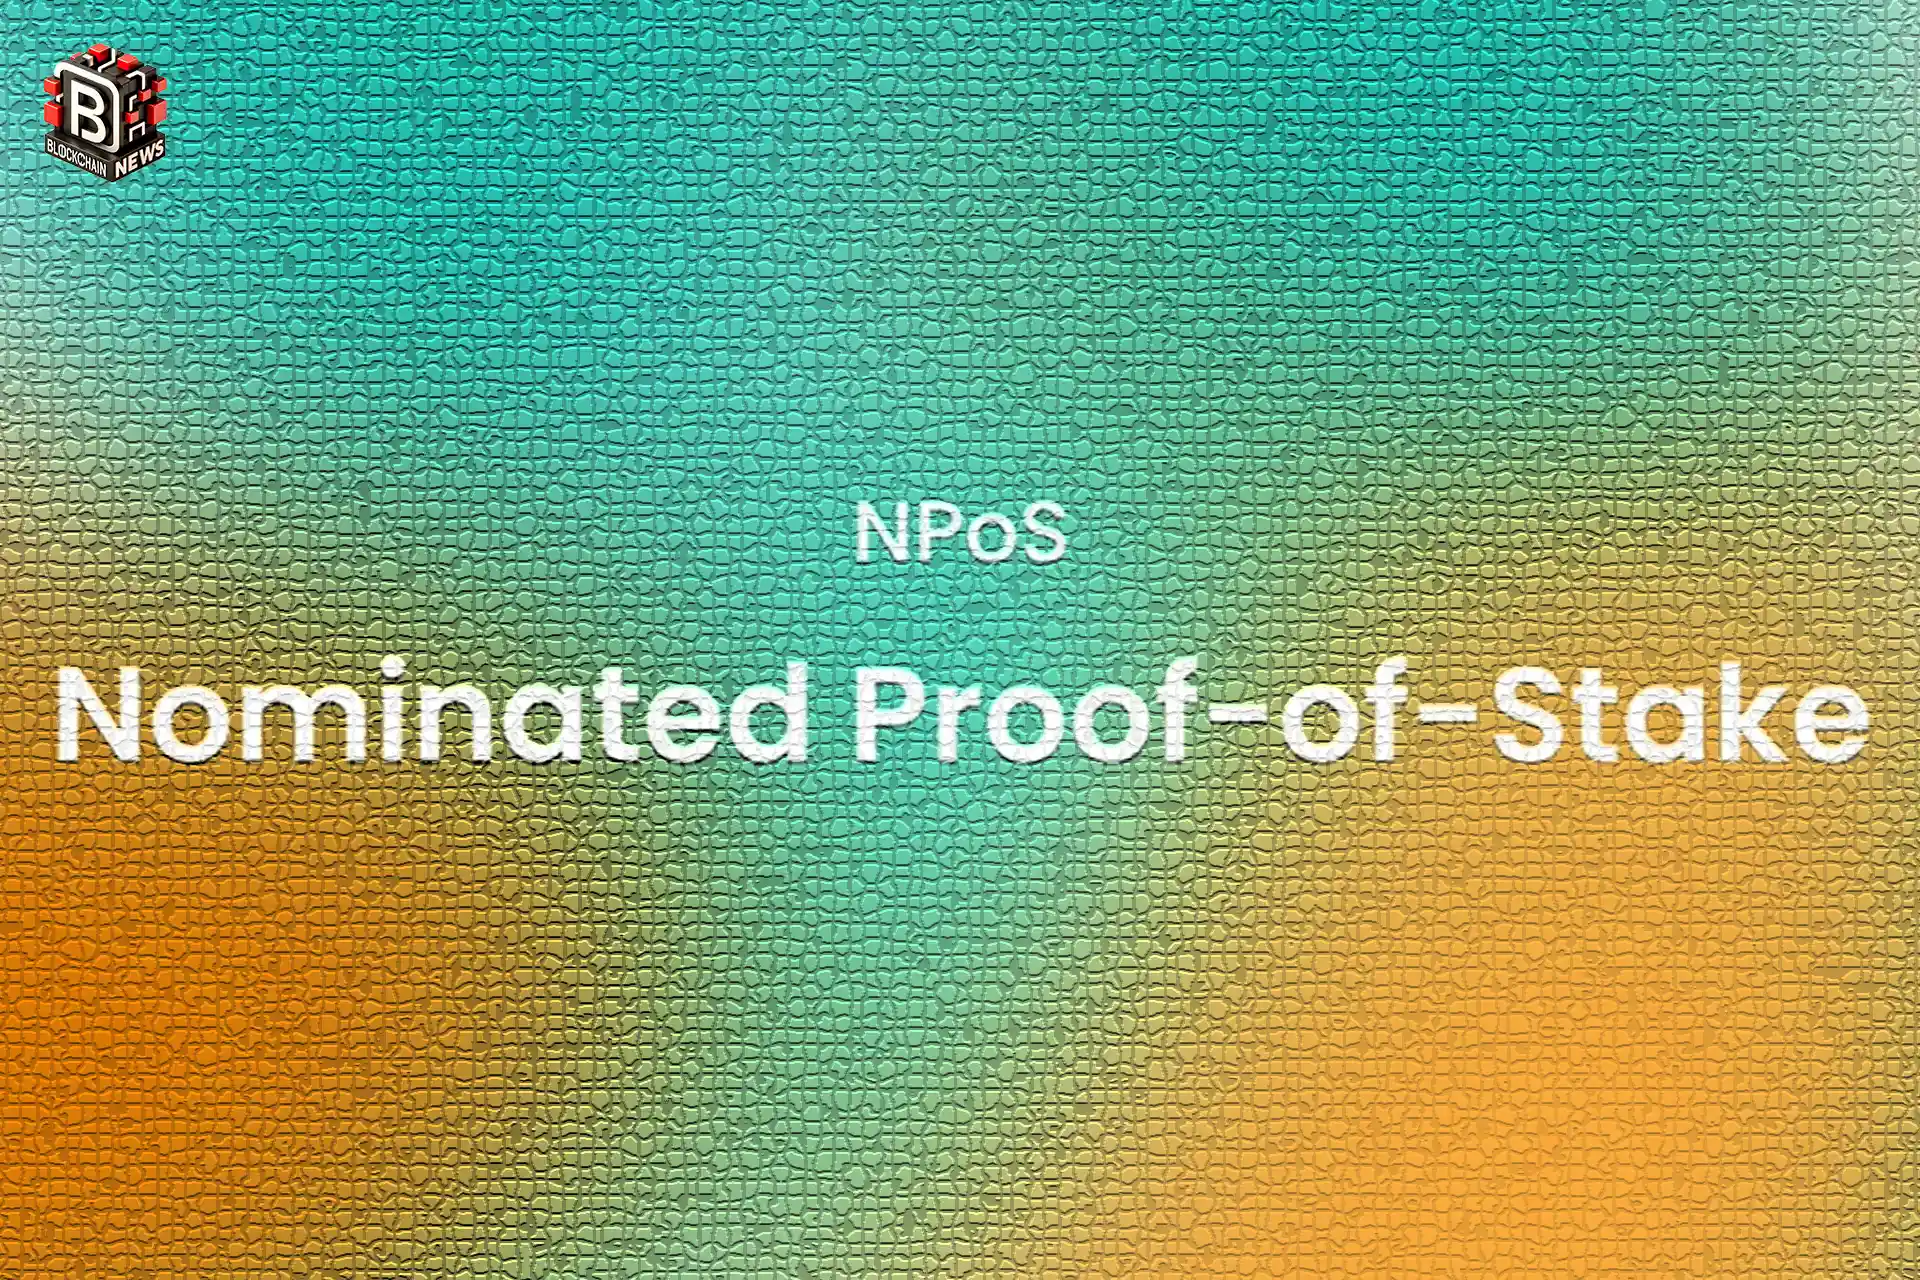 Nominated-Proof-of-Stake